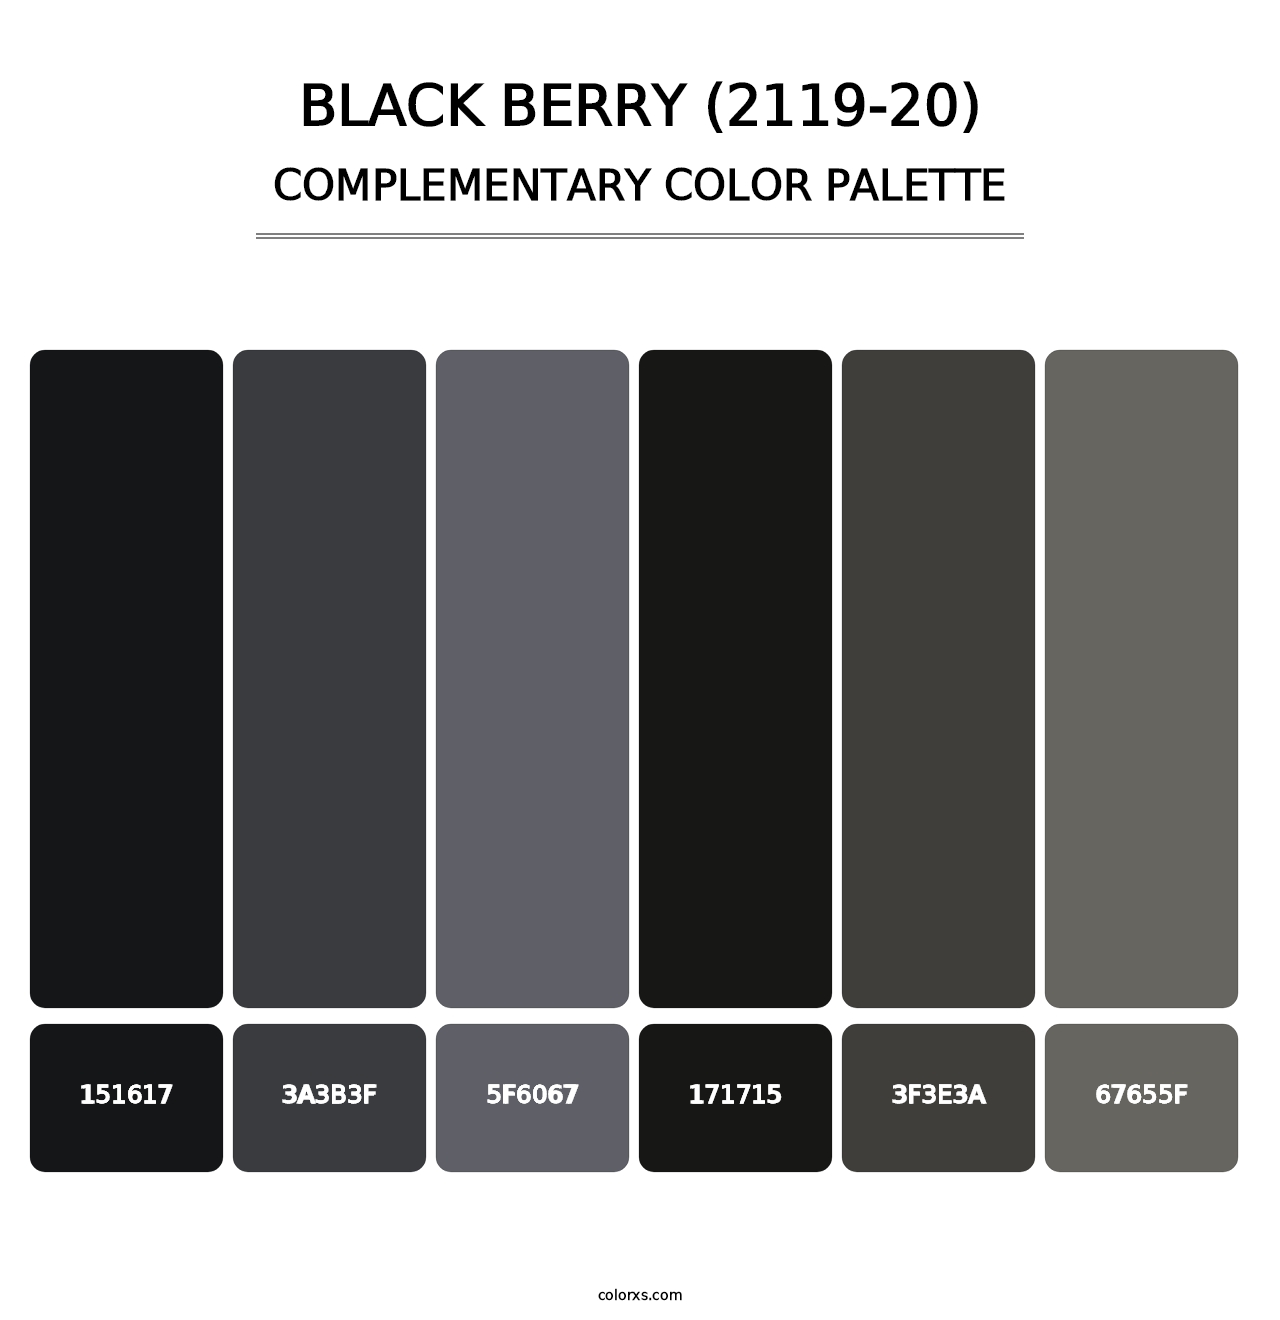 Black Berry (2119-20) - Complementary Color Palette